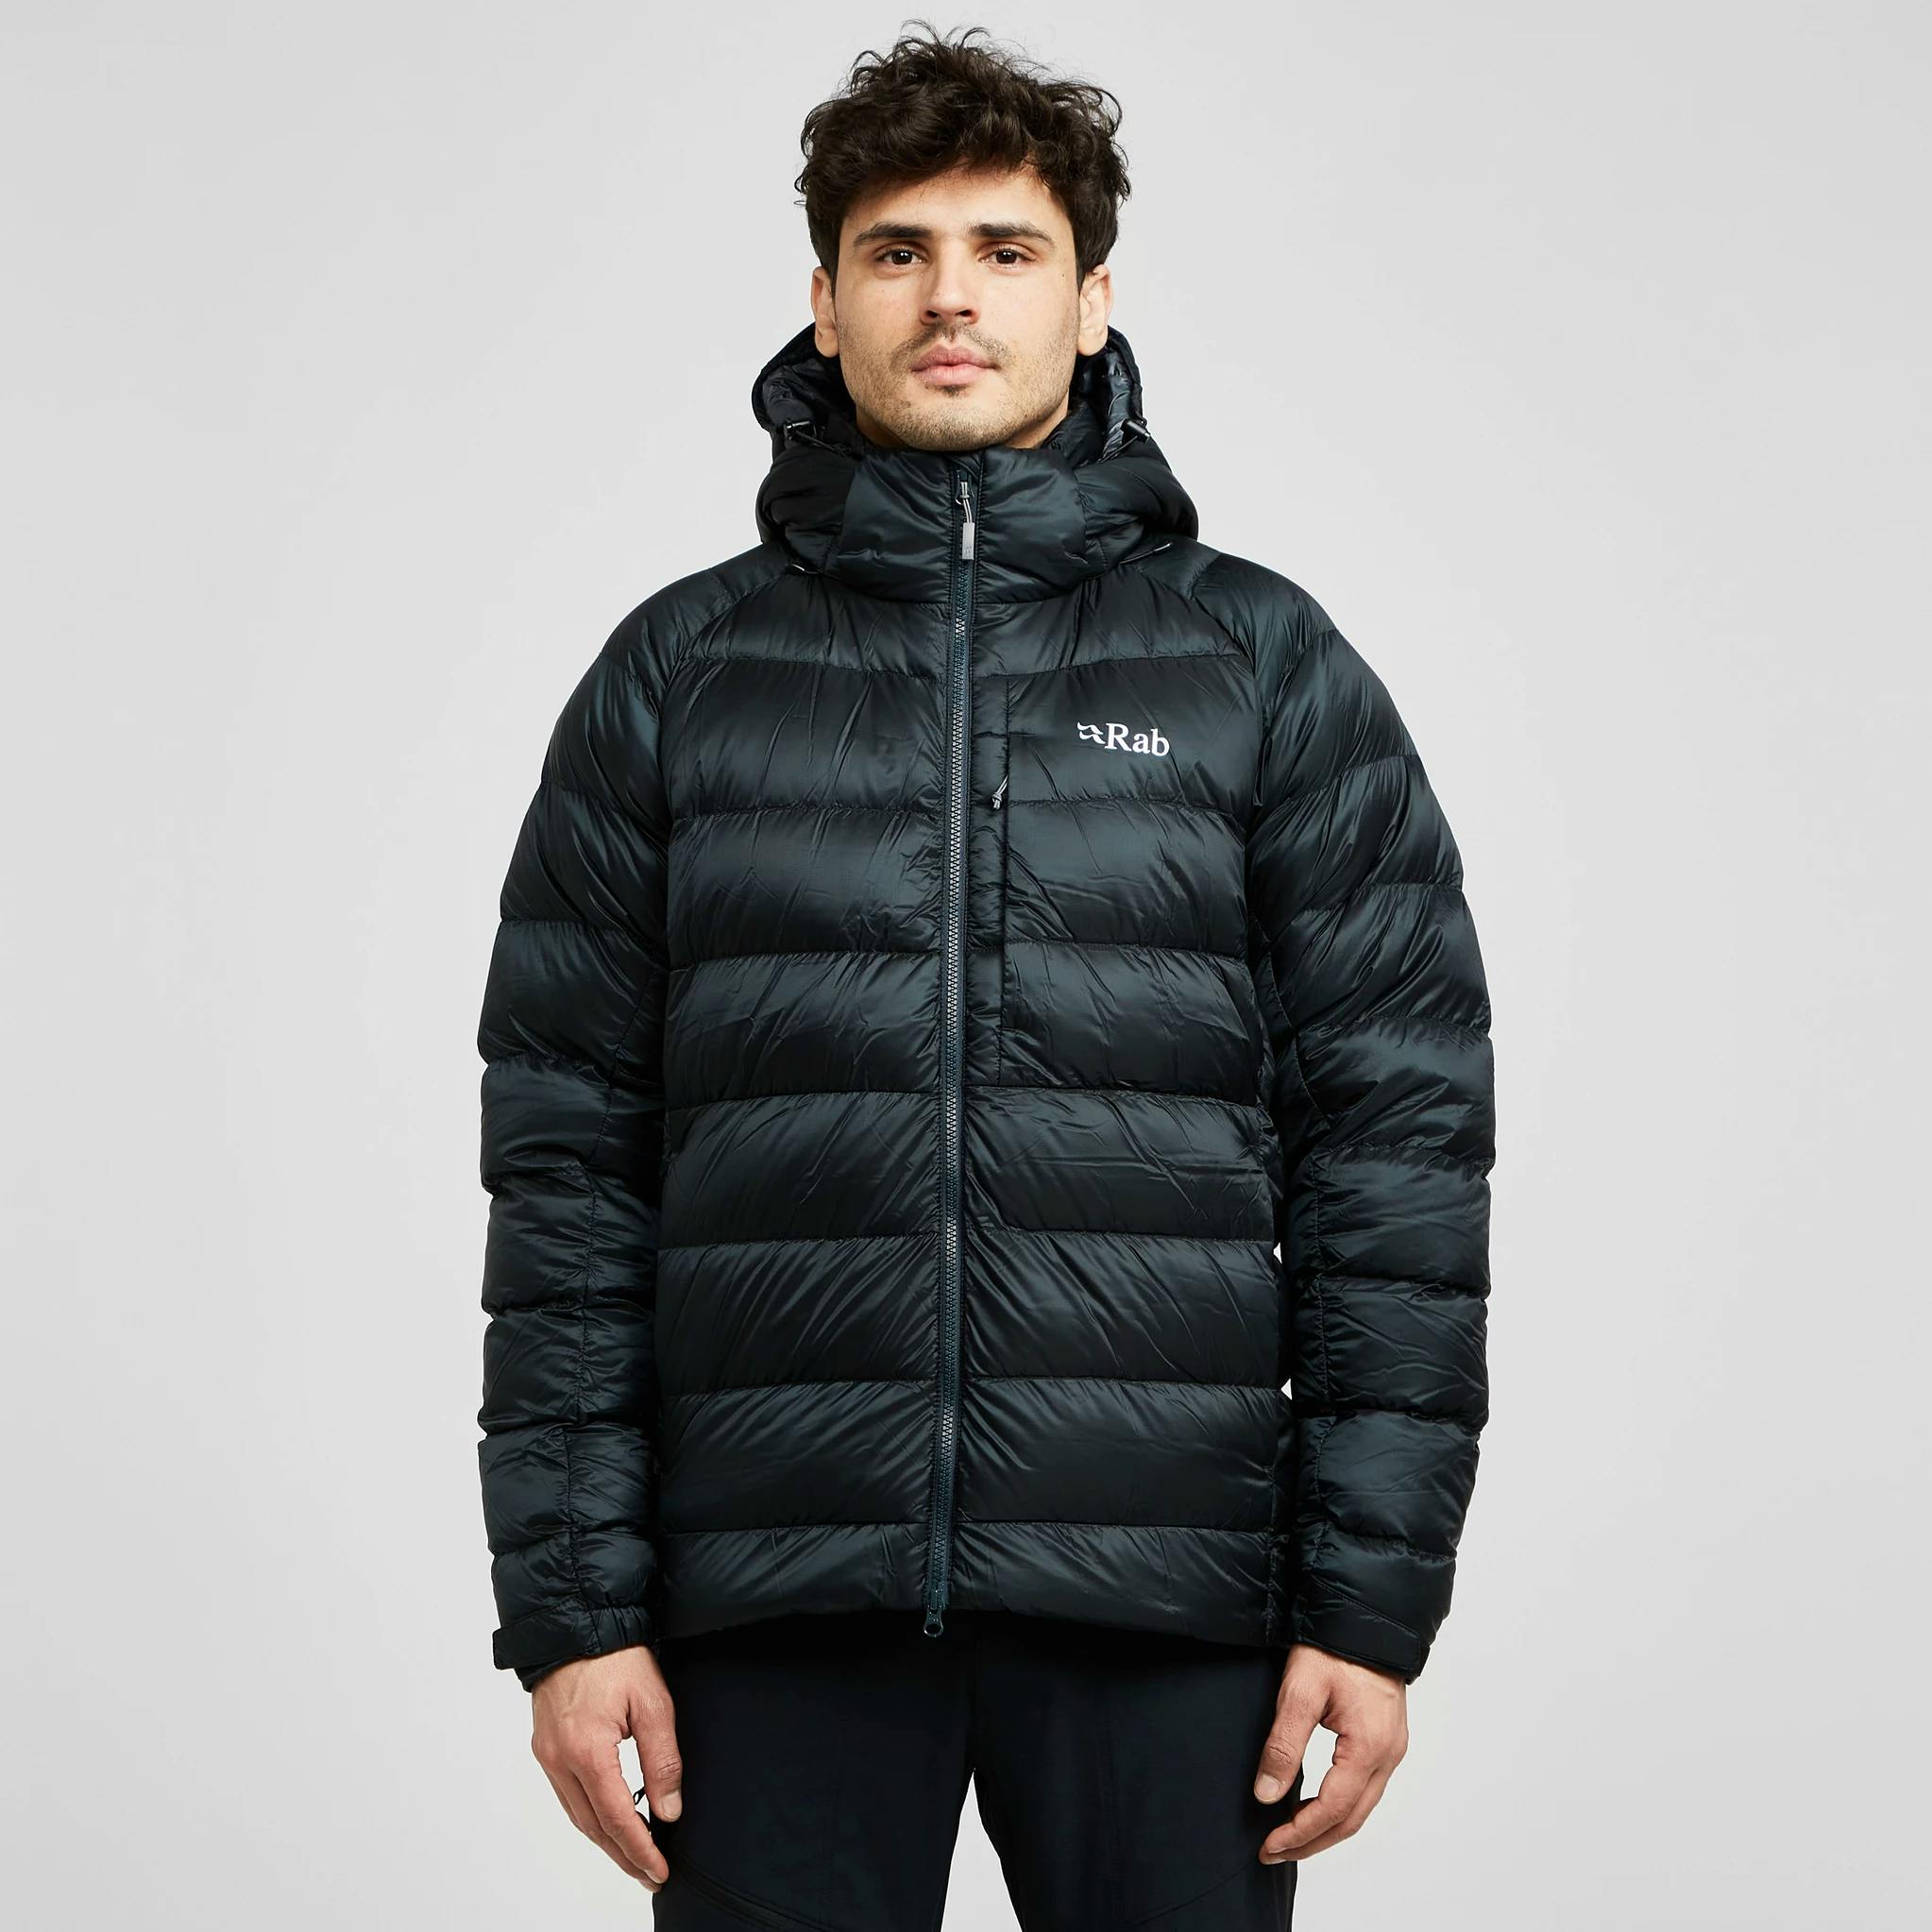 Rab Men's Axion Pro Insulated Jacket